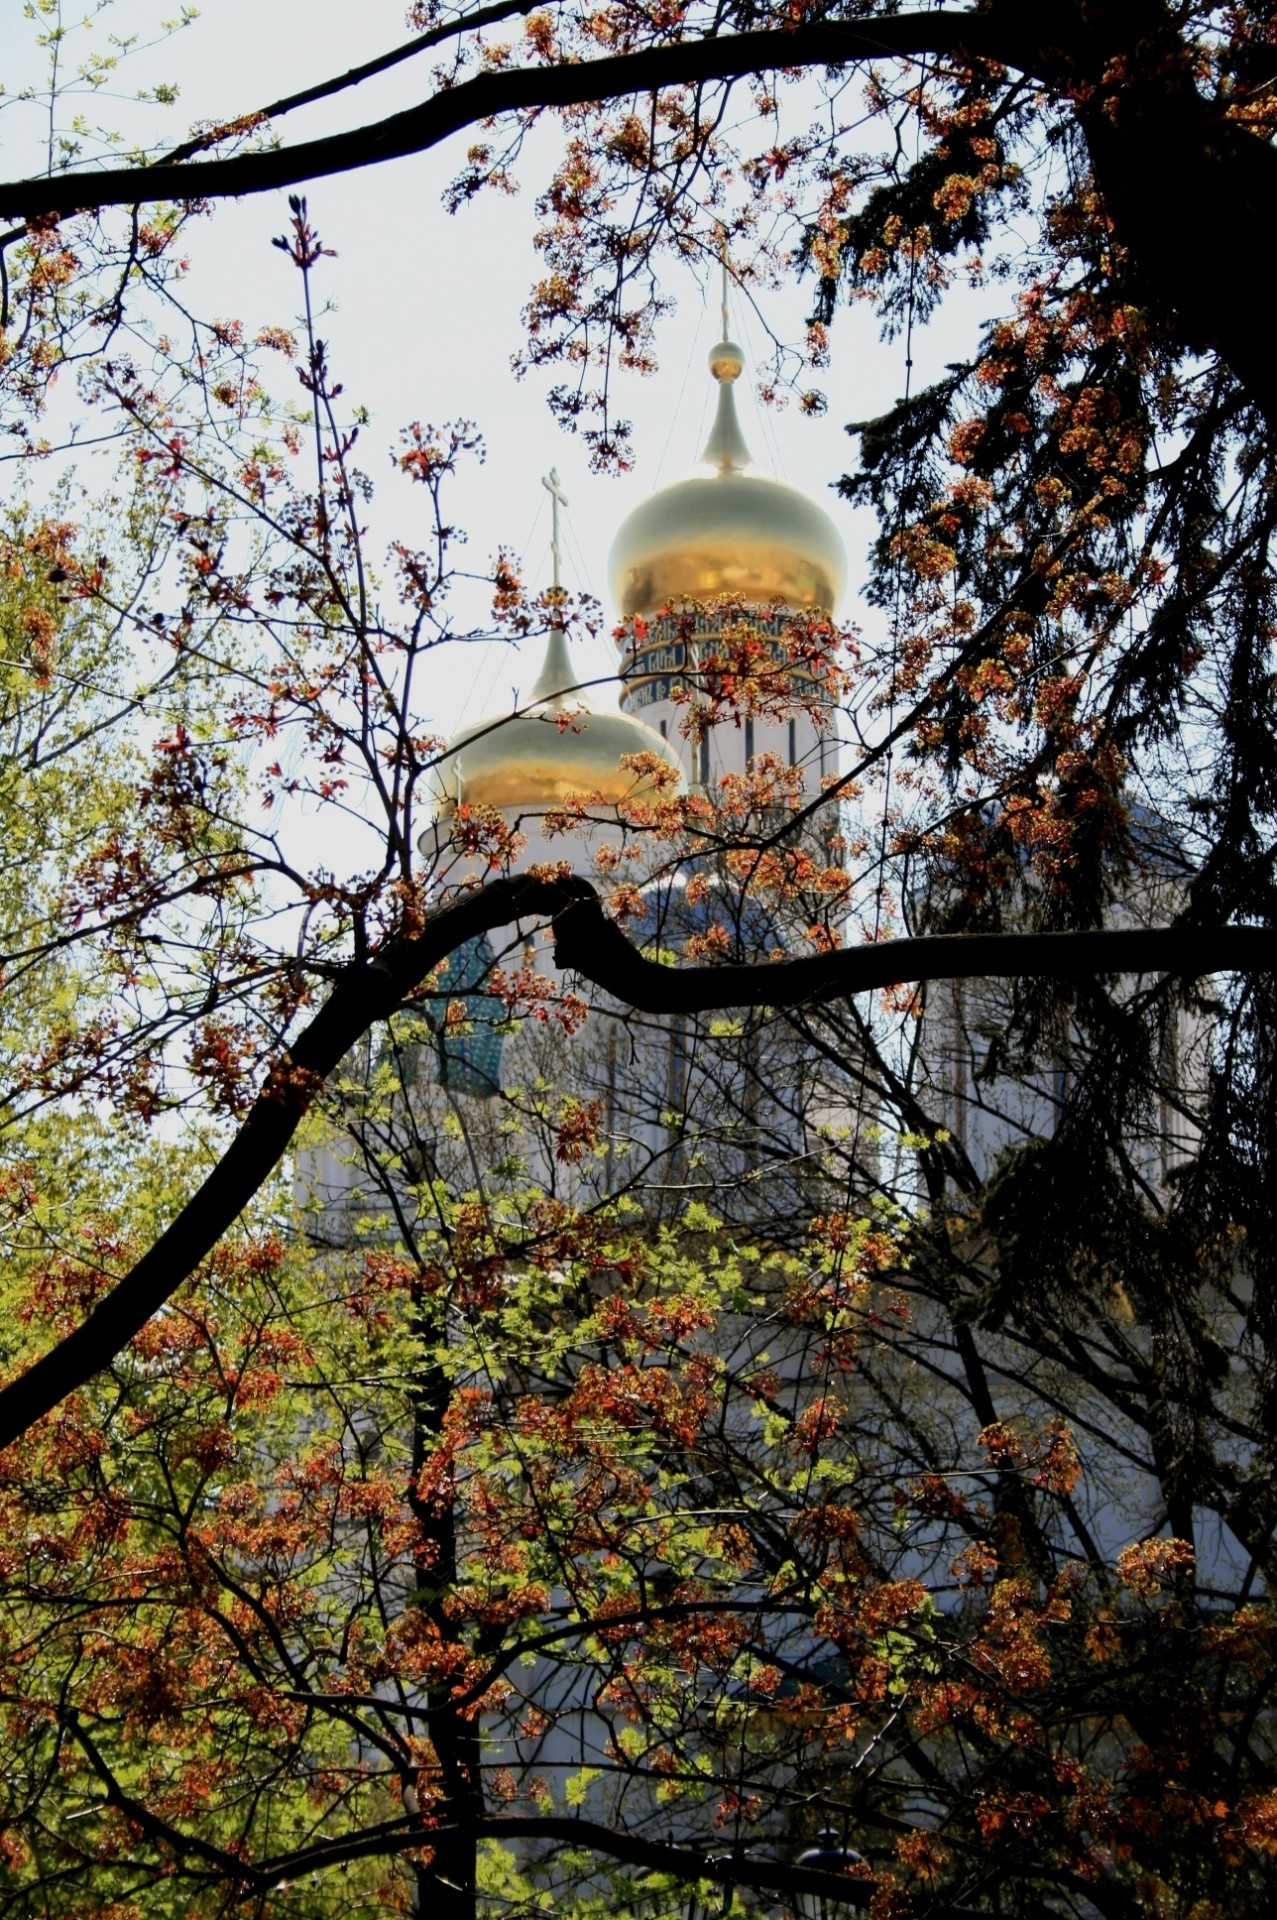 Glimpse of golden cupolas of Cathedral of the Archangel and Ivan the Great bell tower on Church Square, Kremlin, Moscow.